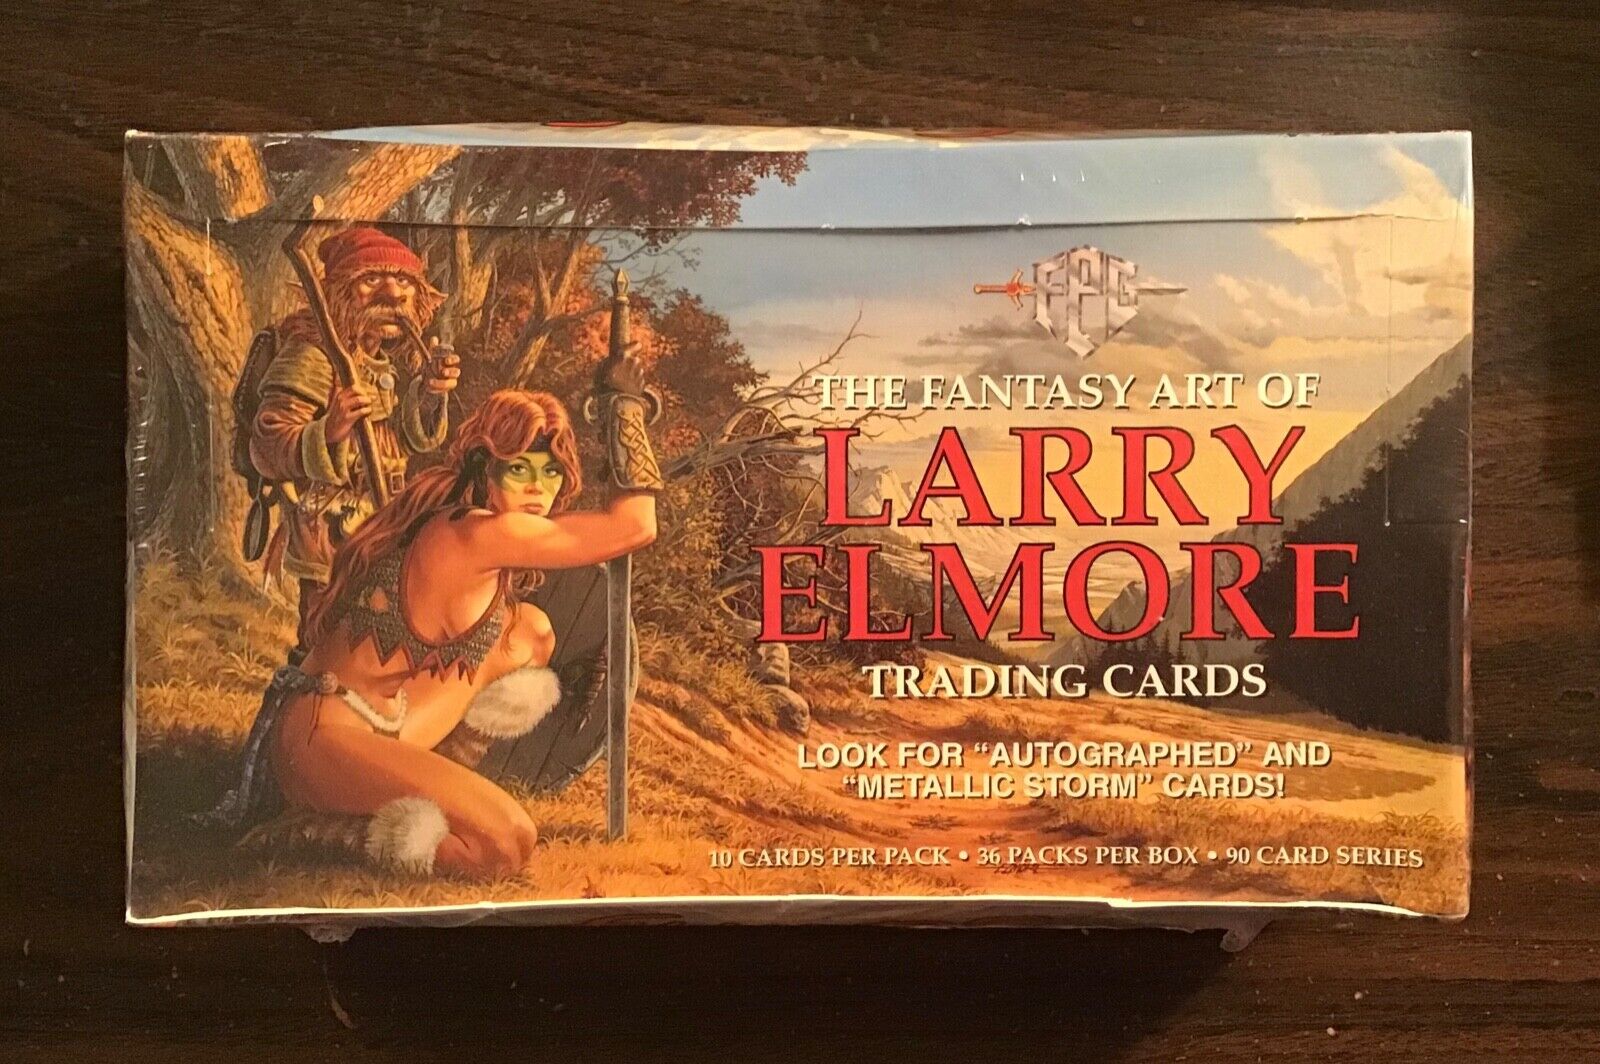 1994 Larry Elmore Fantasy Art trading card factory sealed box Dungeons & Dragons